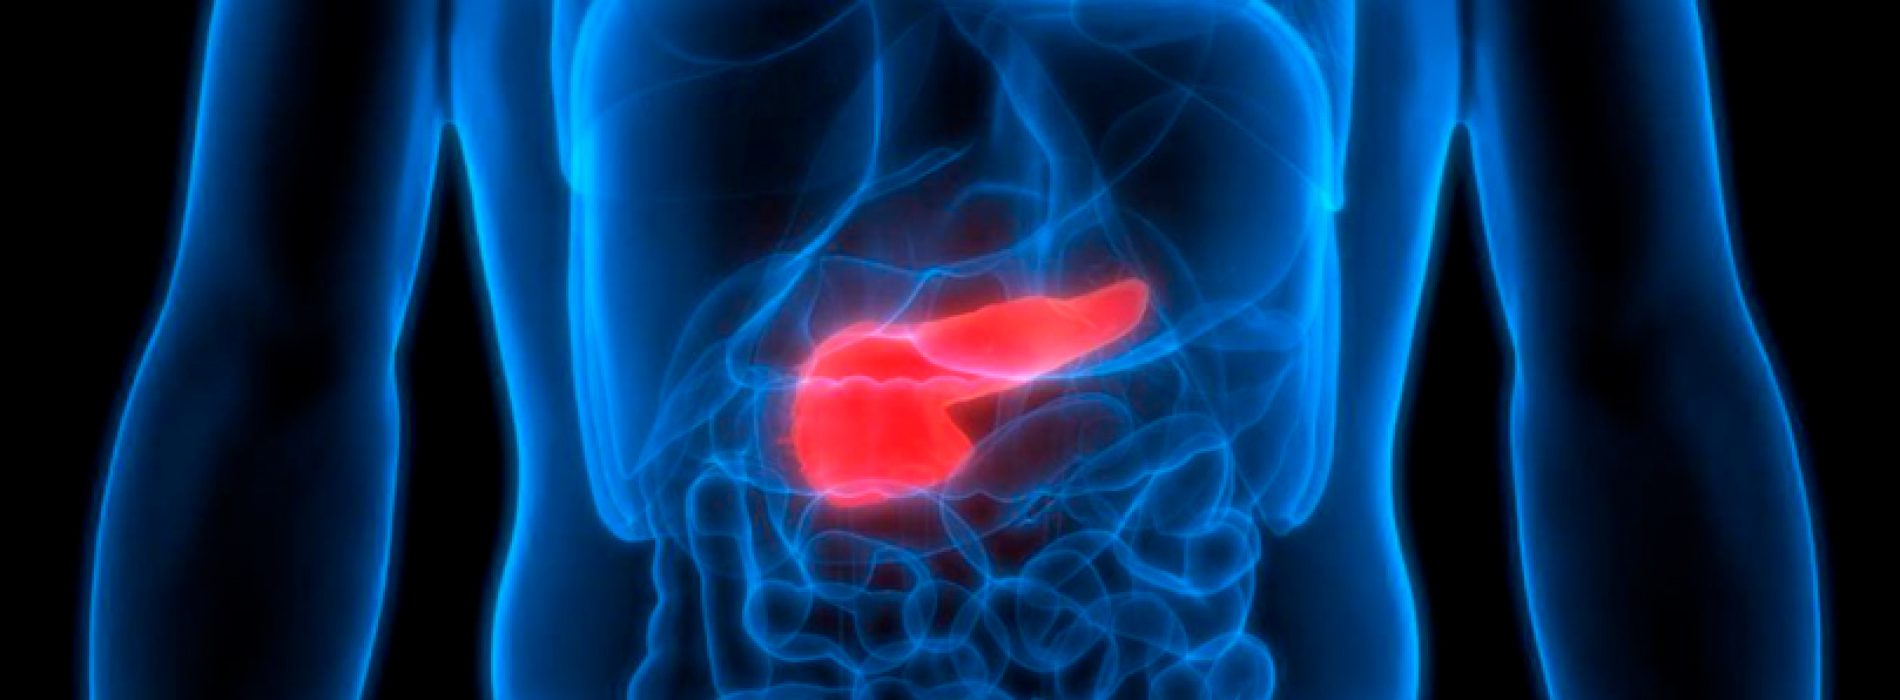 They achieve for the first time the disappearance of pancreatic cancer in mice